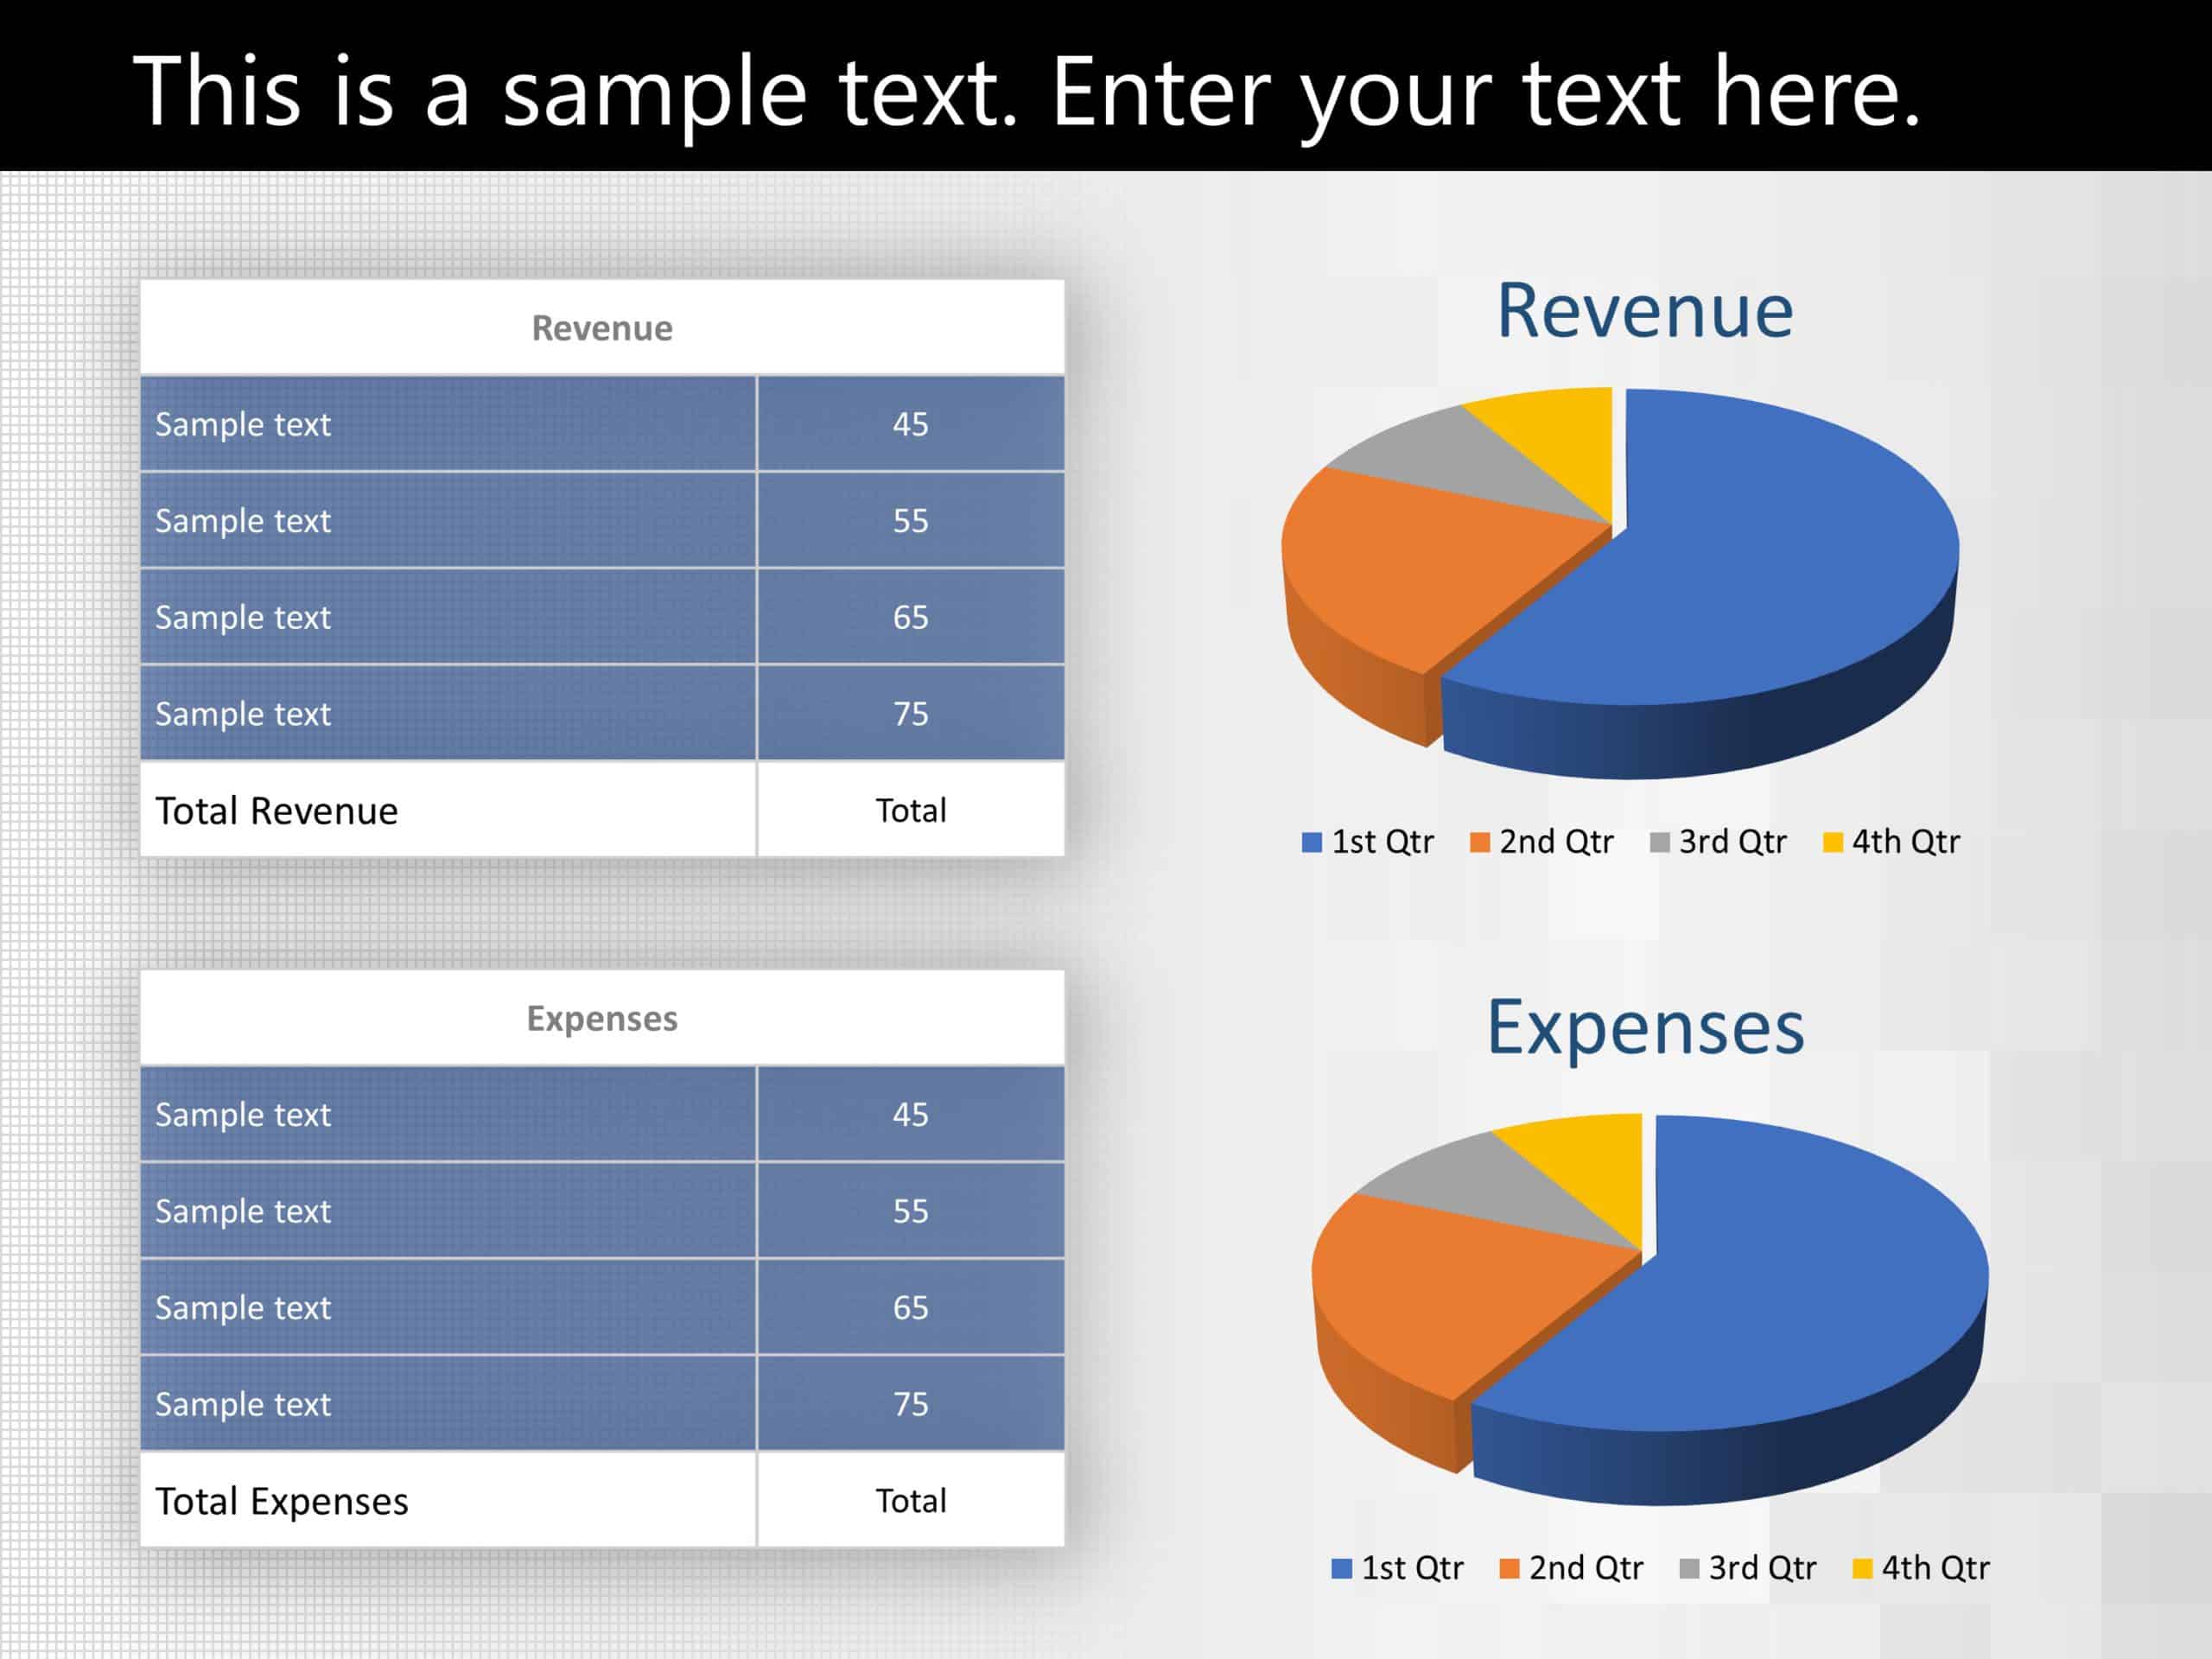 Income Statement PowerPoint Template & Google Slides Theme